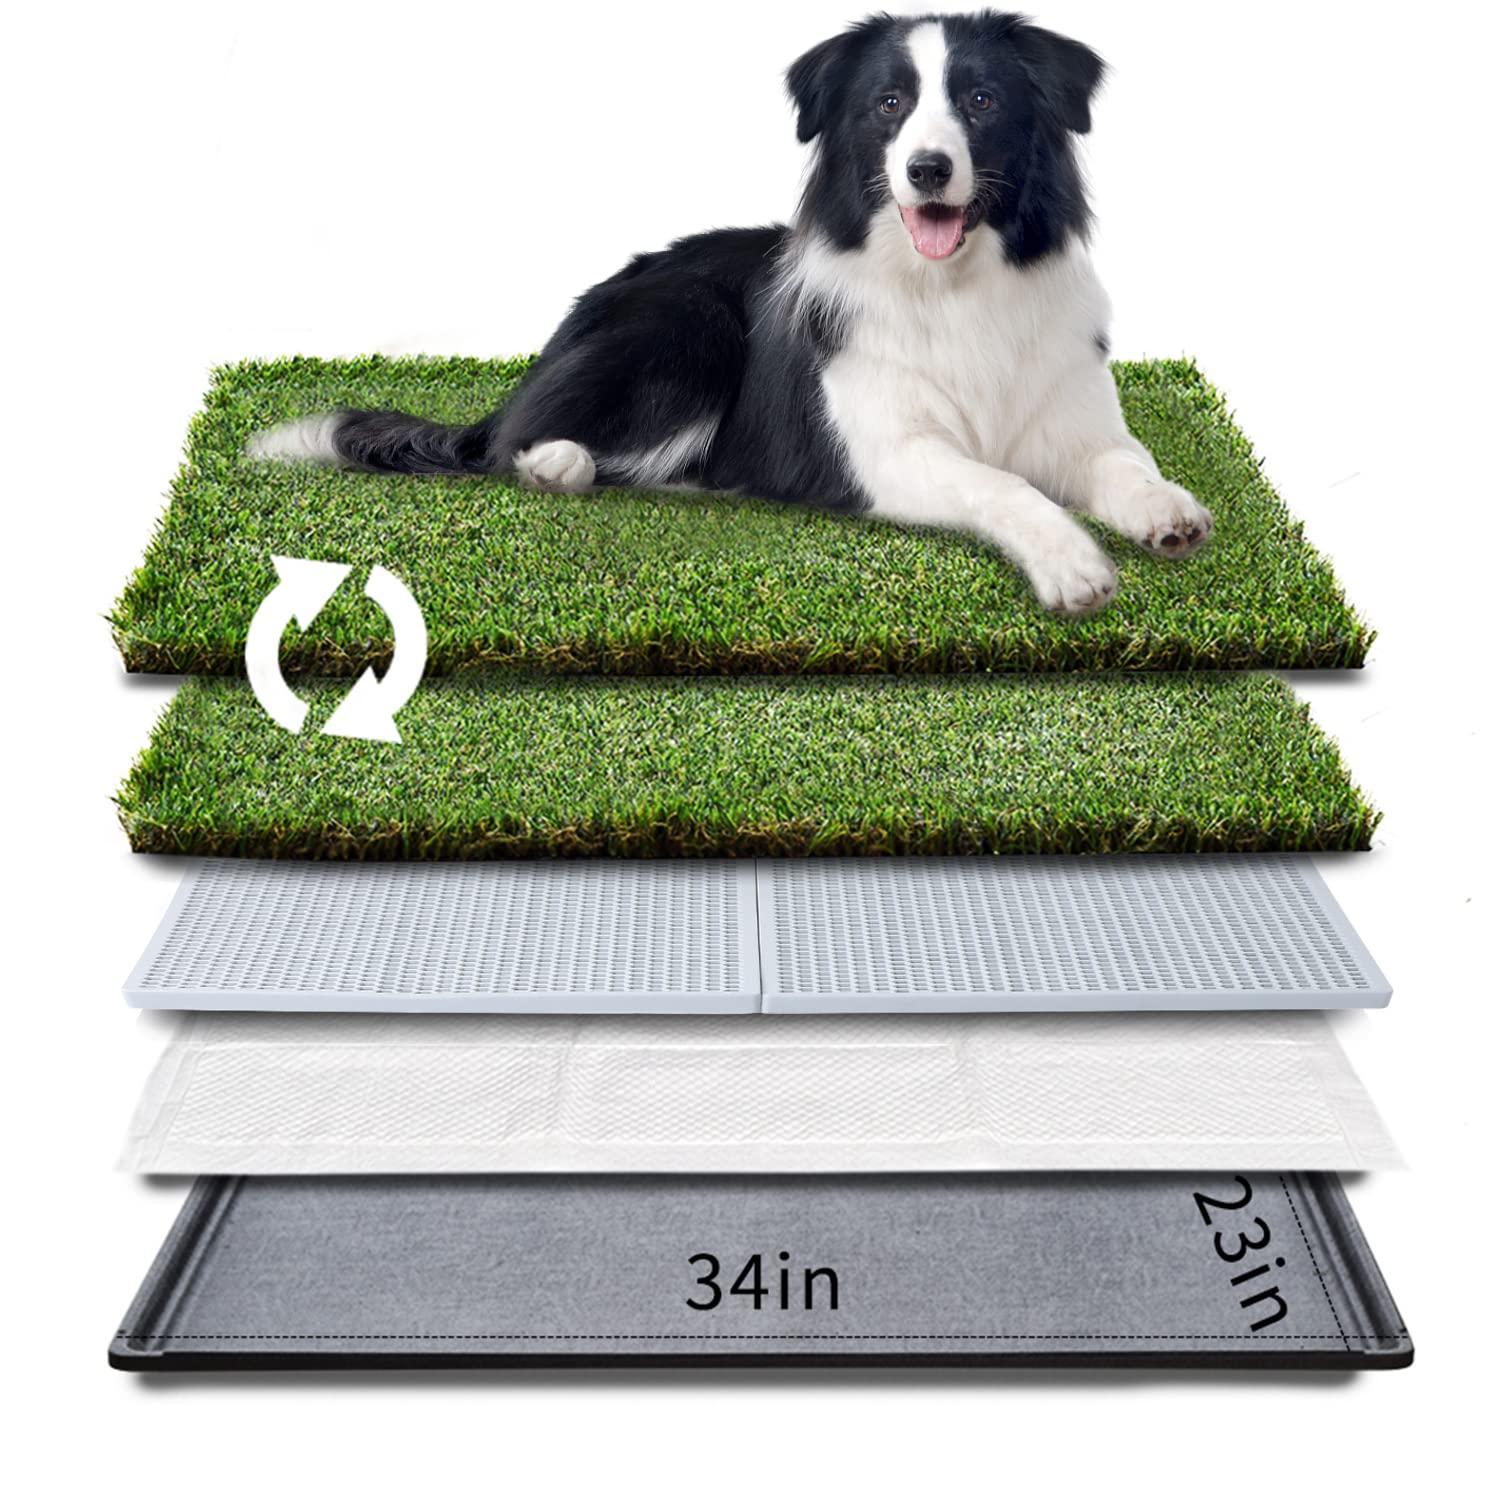 HQ4us Dog Grass pad with Tray Large Dog Litter Box Toilet 34